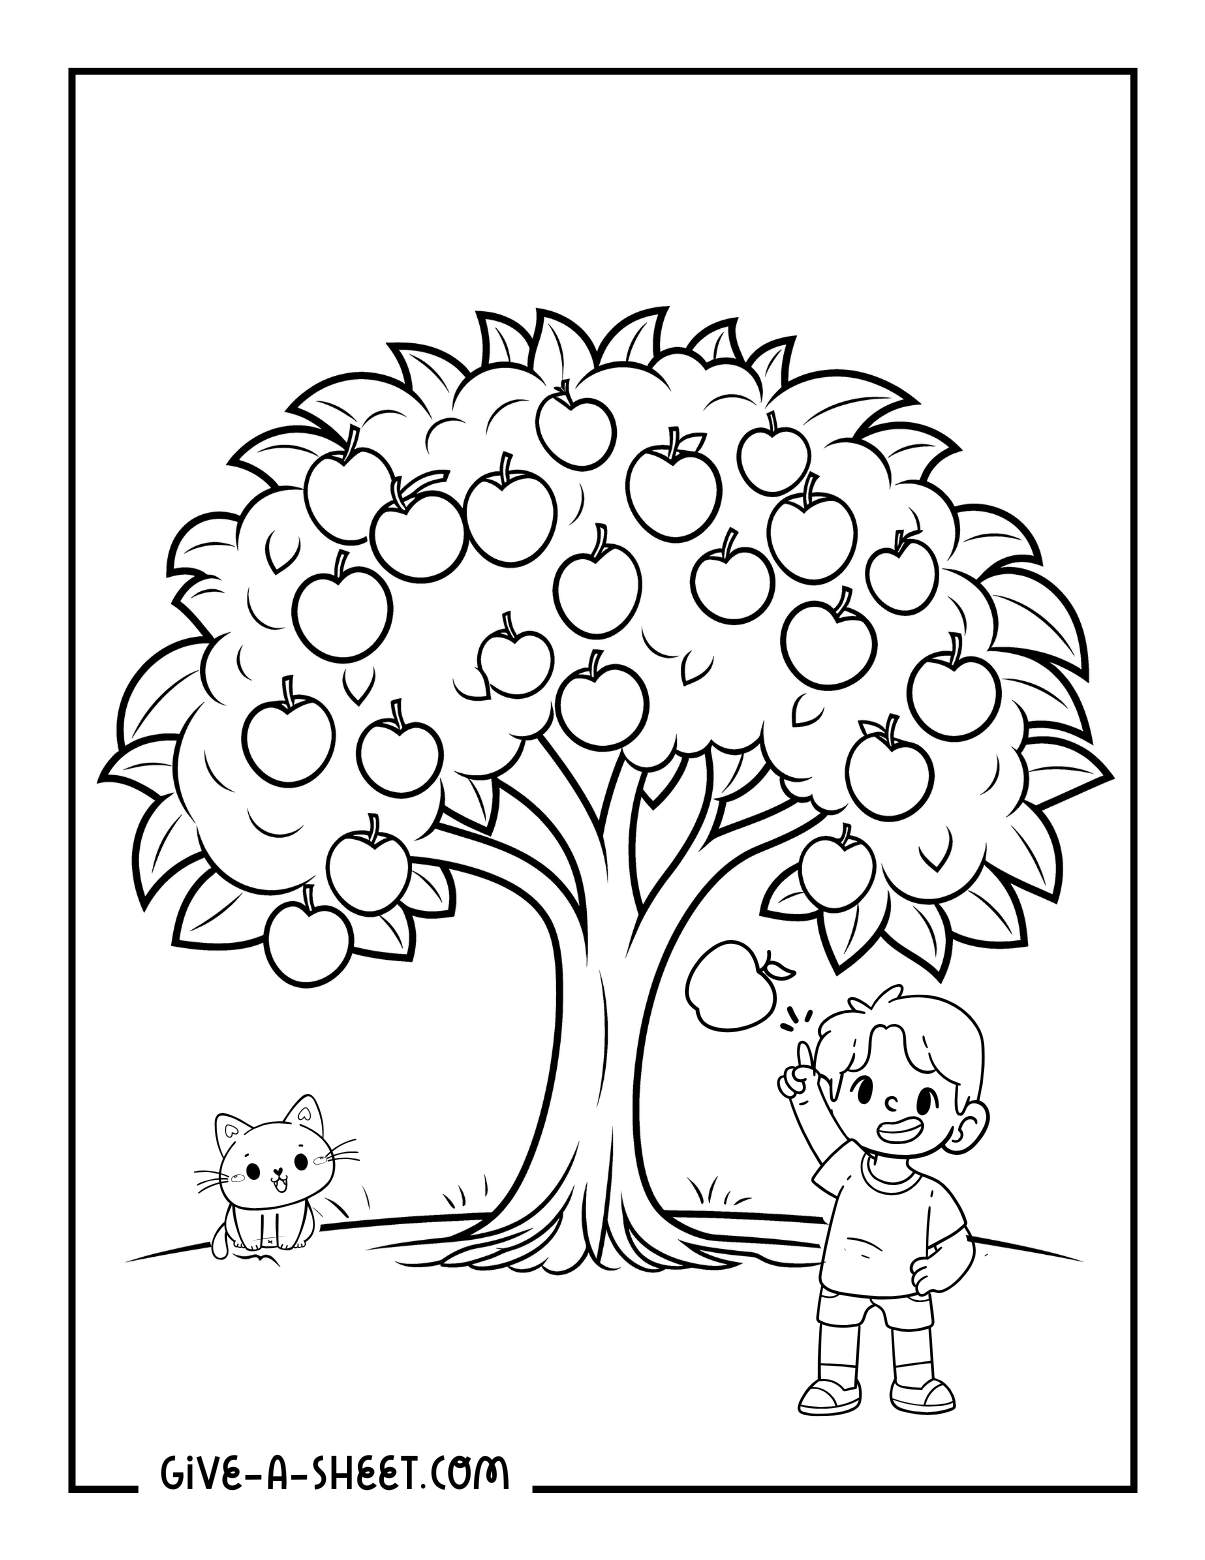 Preschoolers picking apples coloring page for kids.